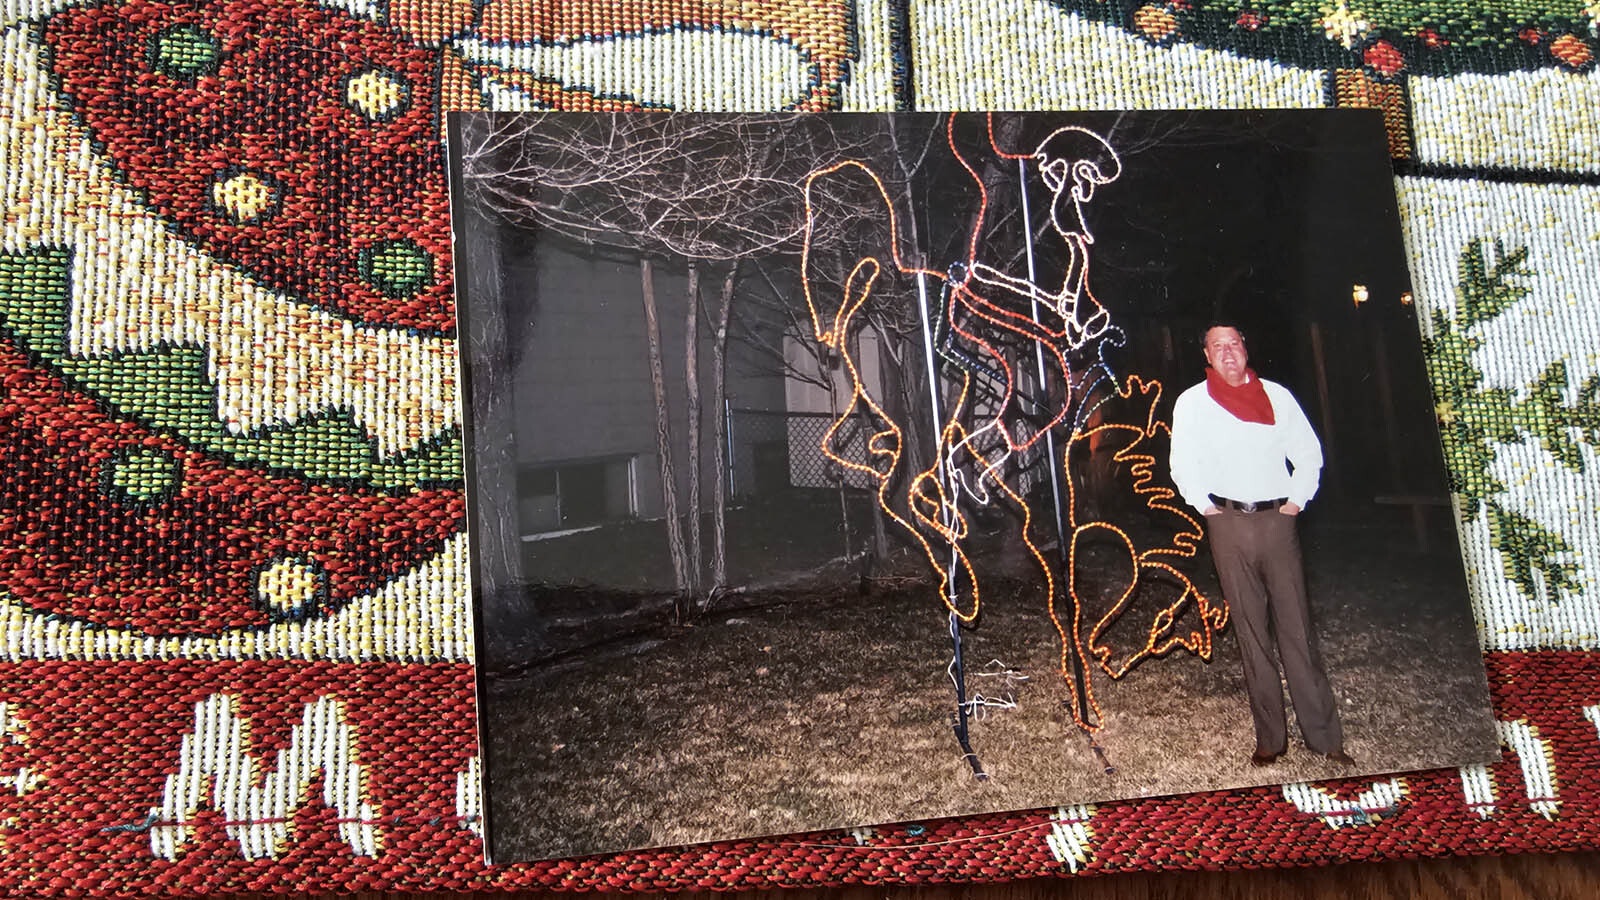 The late Brooks Mitchell in this photo with the bucking horse and Santa rider he commissioned from a specialty welding company in Colorado.